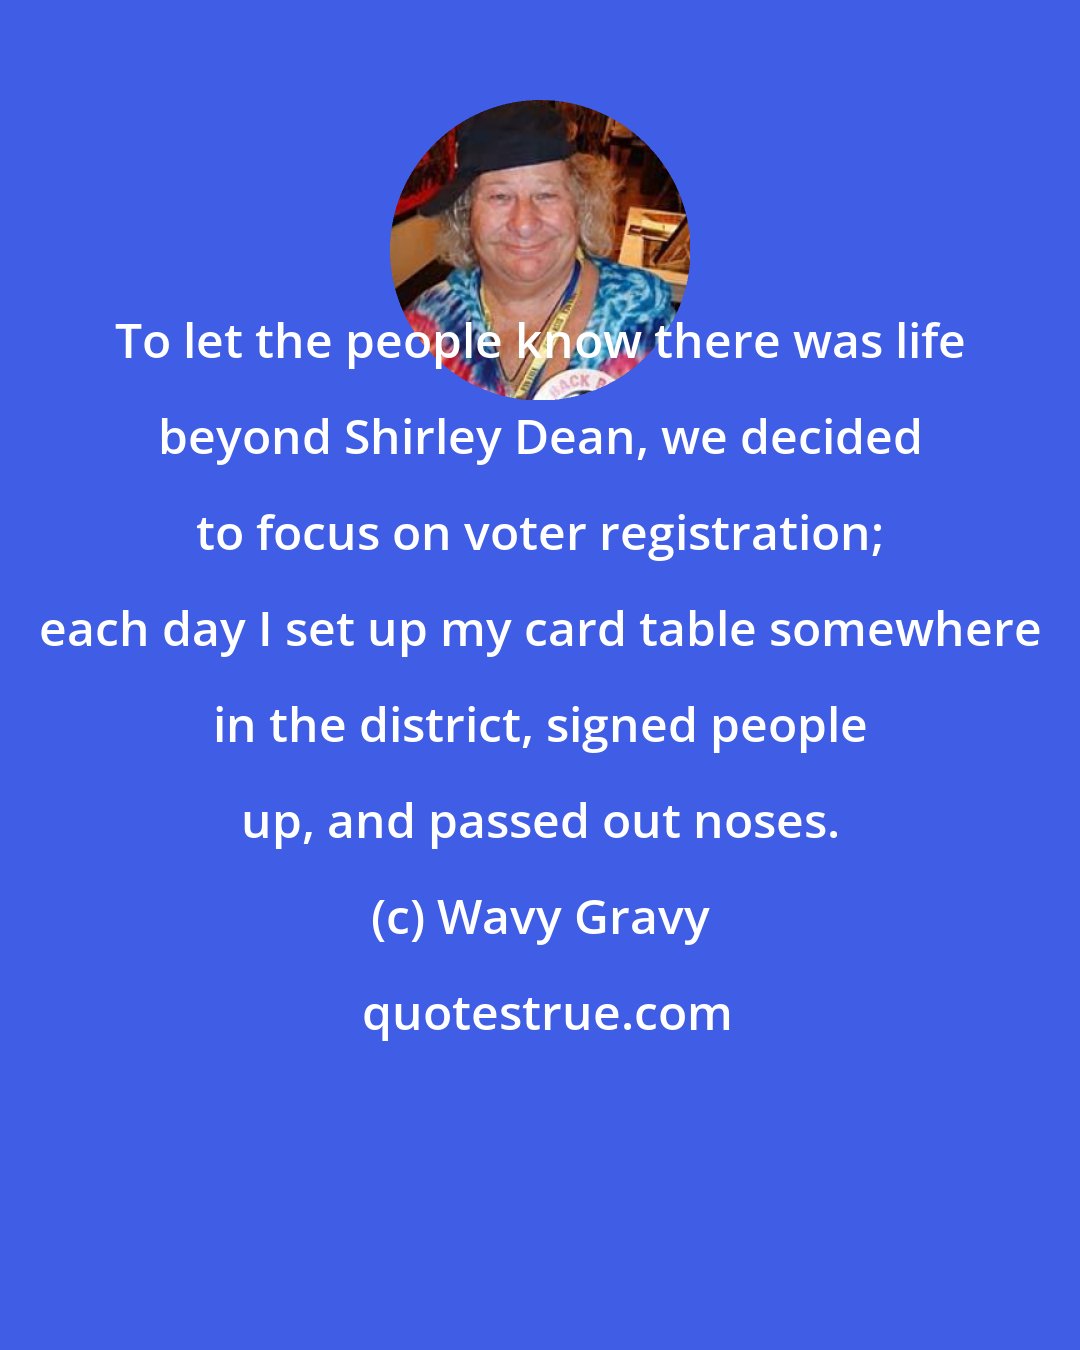 Wavy Gravy: To let the people know there was life beyond Shirley Dean, we decided to focus on voter registration; each day I set up my card table somewhere in the district, signed people up, and passed out noses.